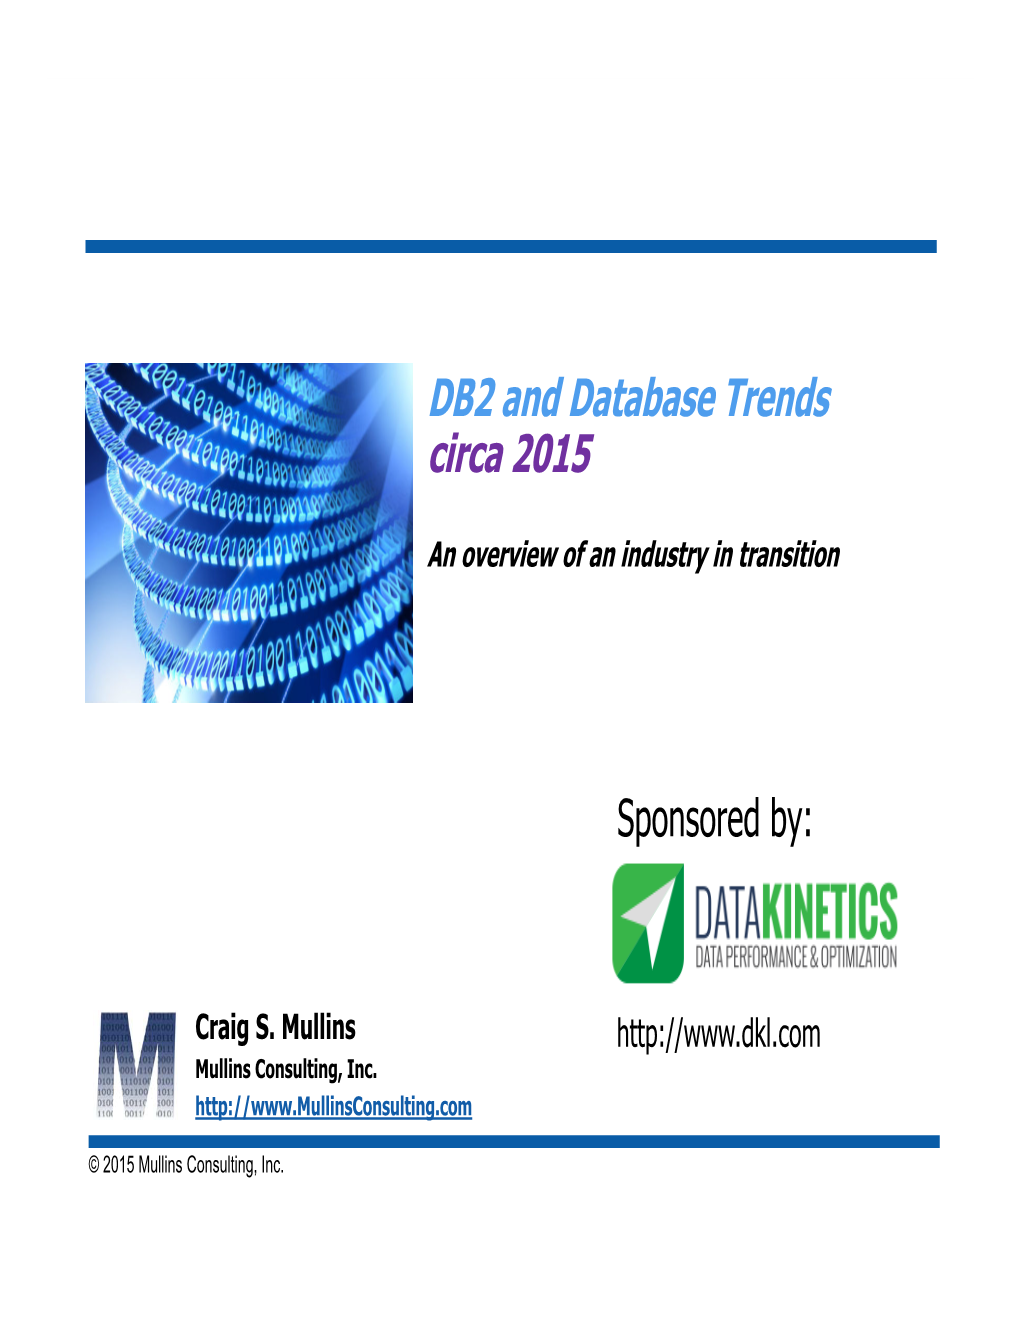 DB2 and Database Trends Circa 2015